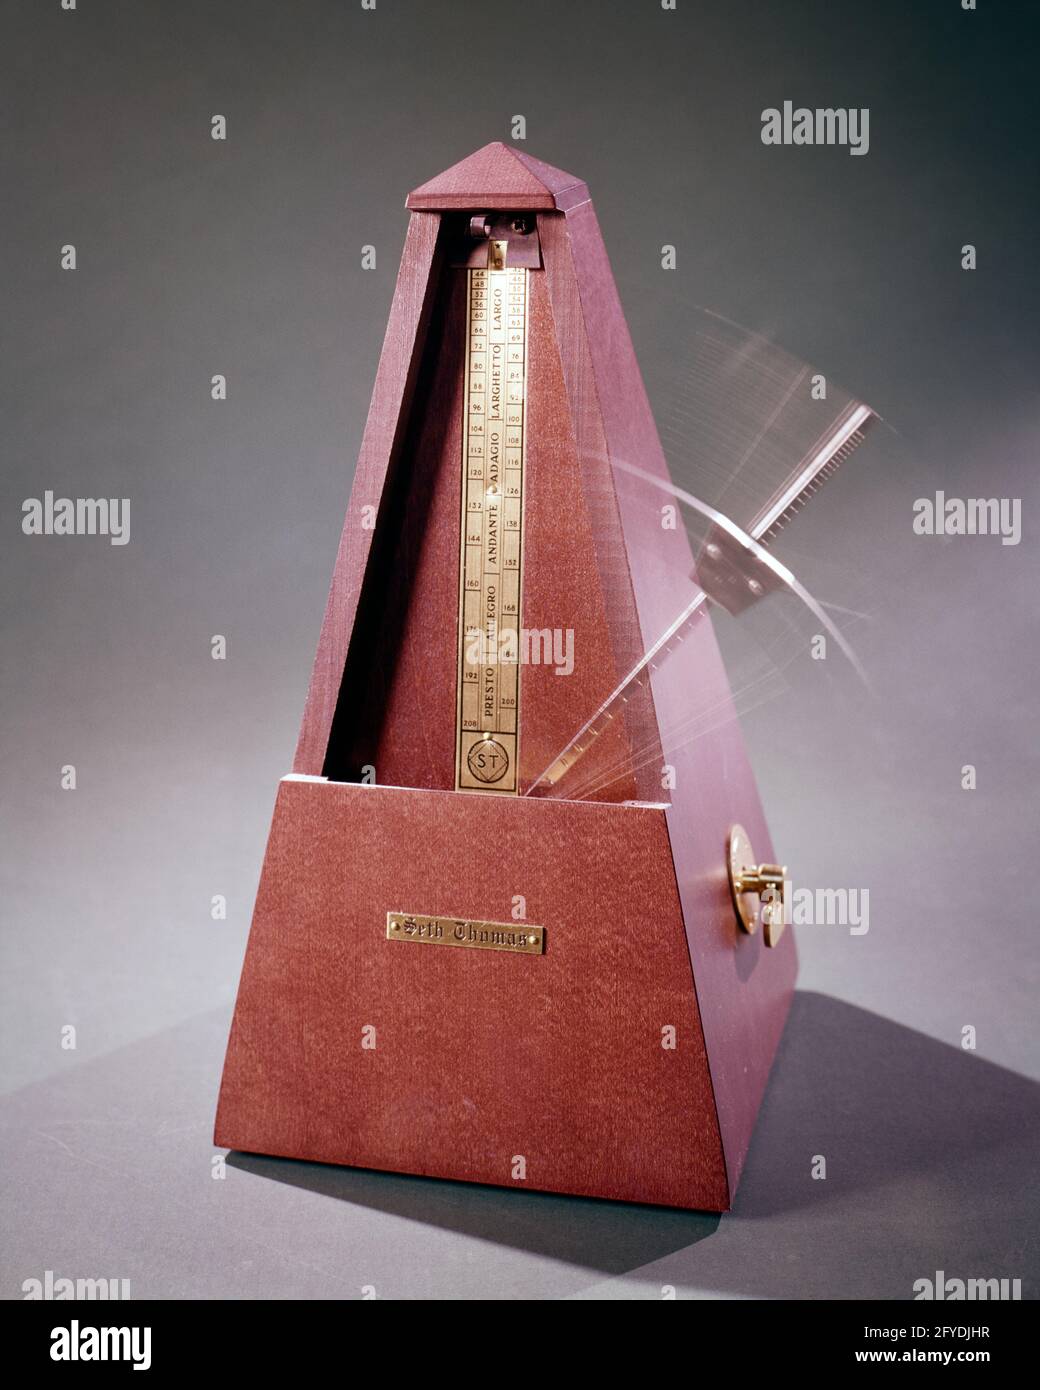 1970s SETH THOMAS MECHANICAL WIND-UP METRONOME WITH SWINGING PENDULUM THAT MAKES A REGULAR TICK USED BY MUSICIANS TO MARK TIME - ks7715 HAR001 HARS TICK HAR001 METRONOME OLD FASHIONED PENDULUM SETH THOMAS Stock Photo